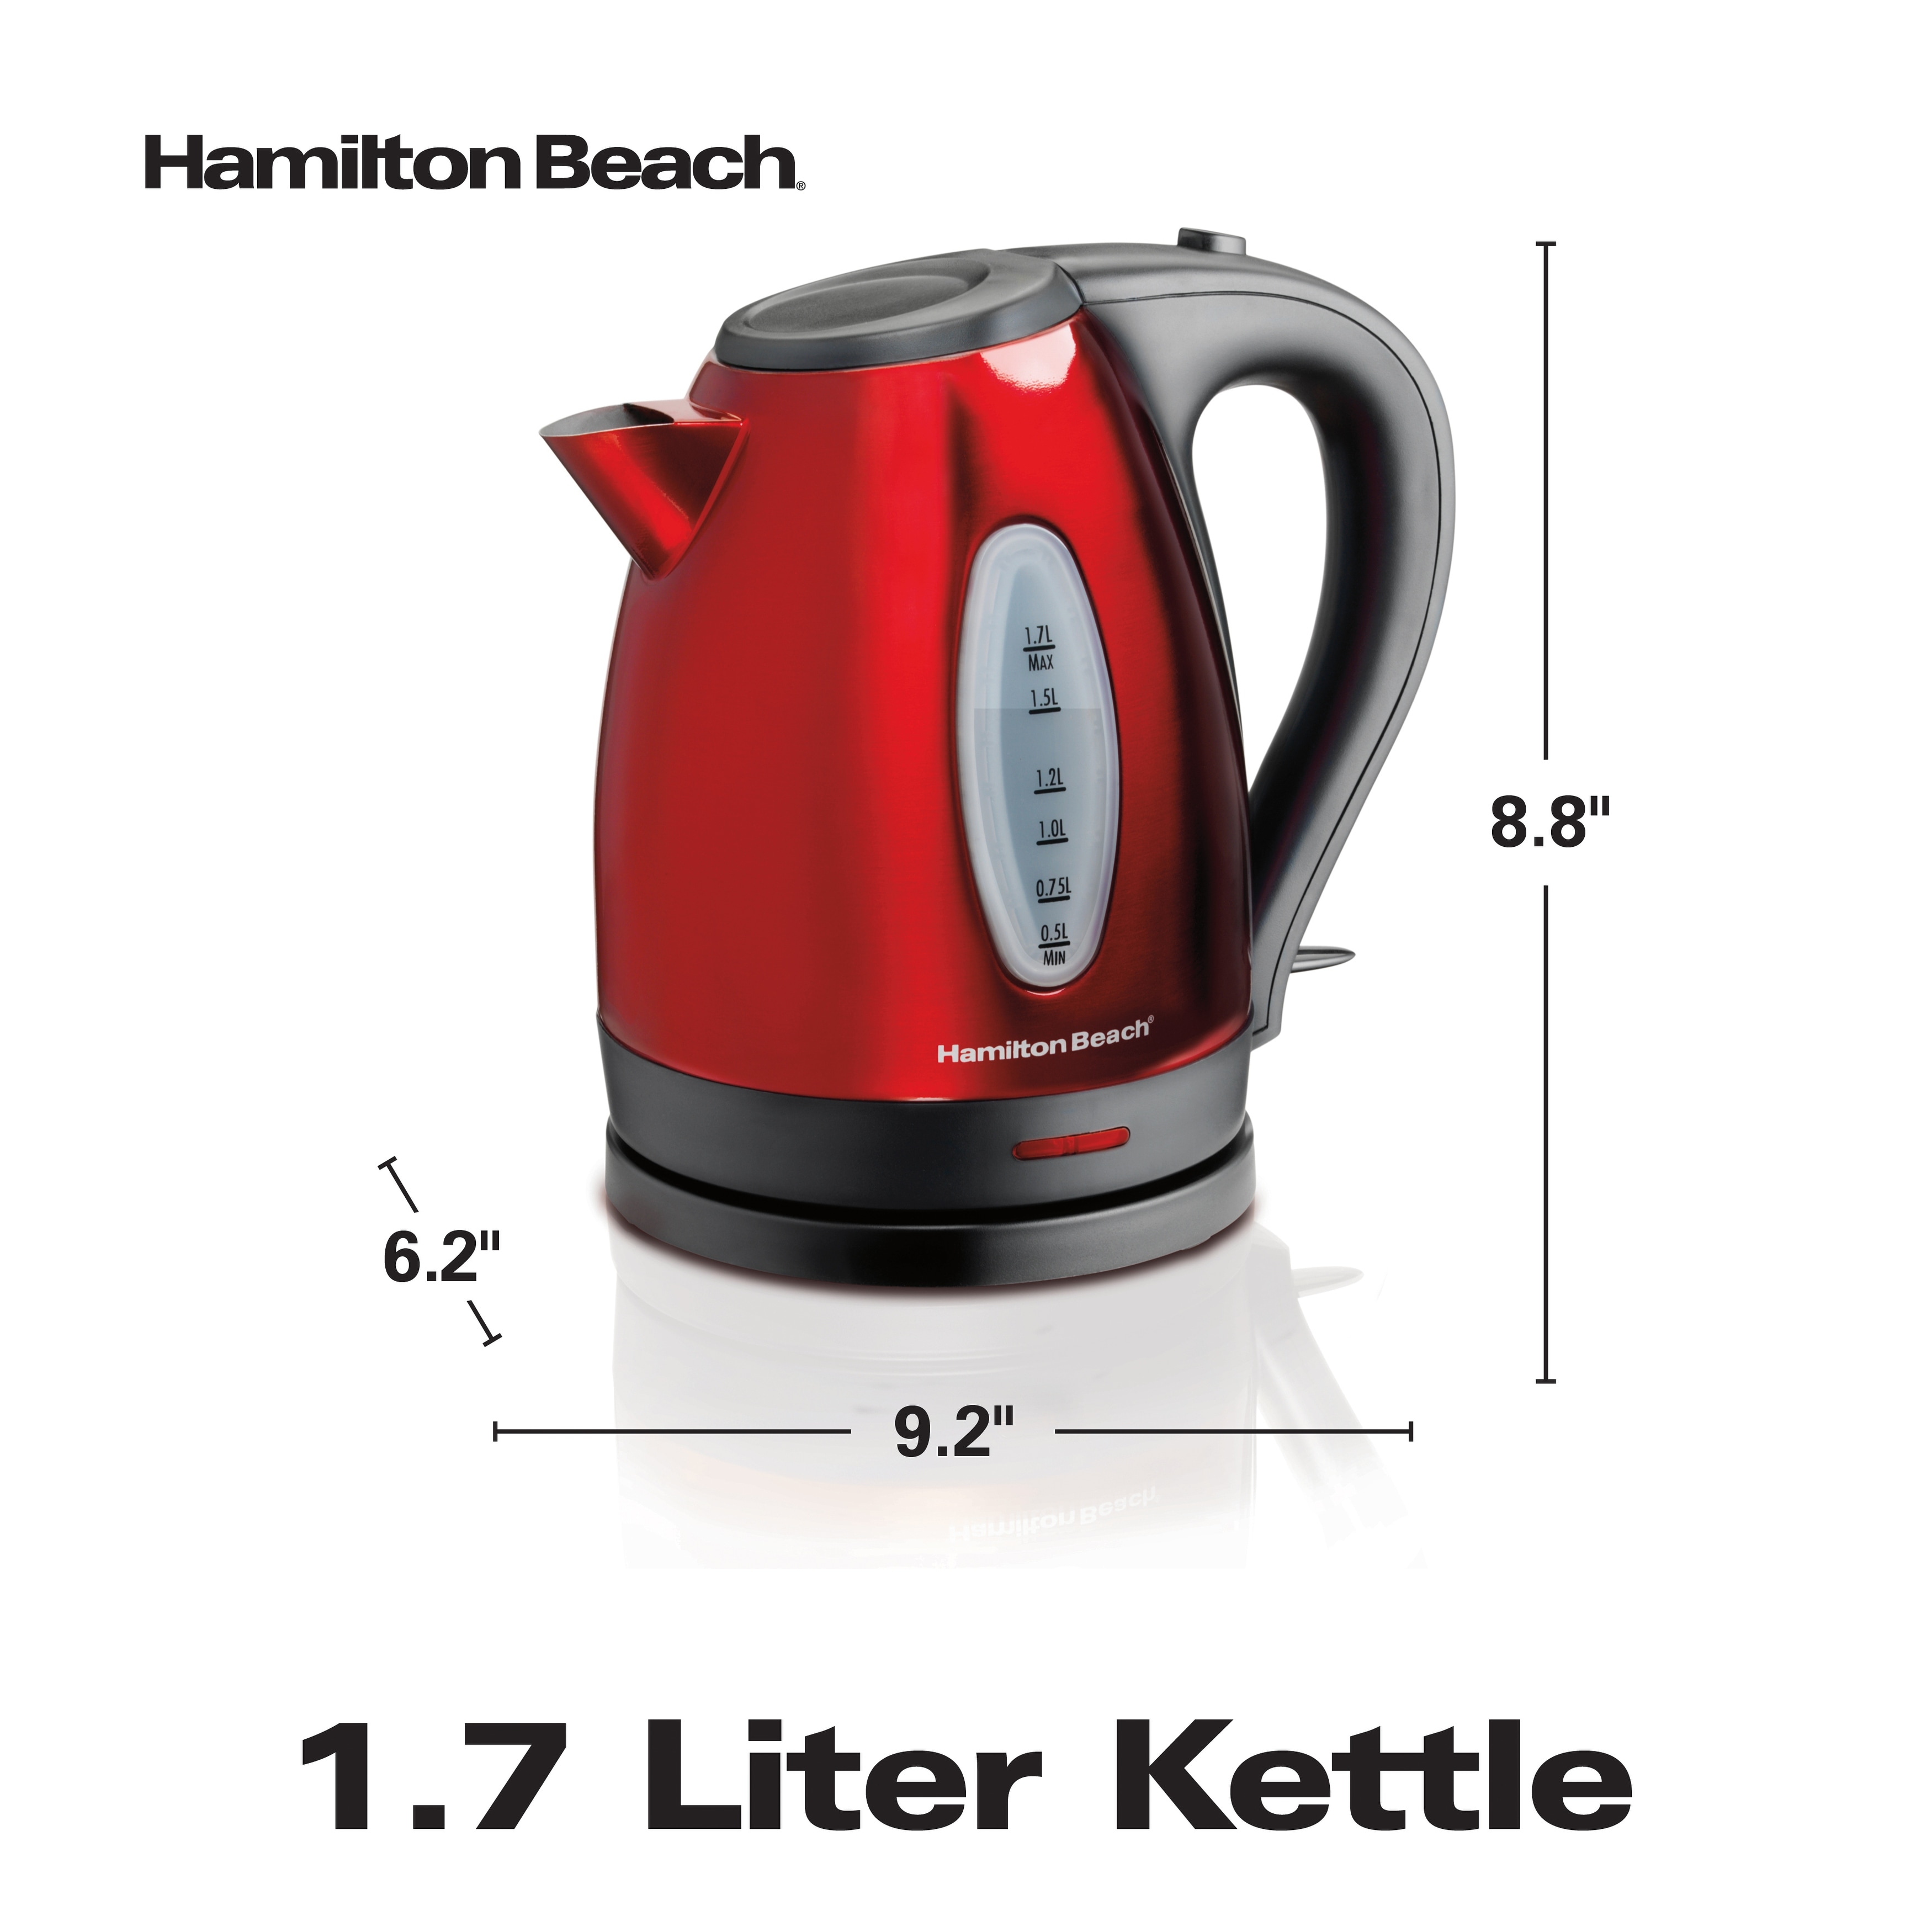 https://ak1.ostkcdn.com/images/products/is/images/direct/805da49415dcfe6d4b22508511326bc76b97e2a5/Hamilton-Beach-Stainless-Steel-1.7-Liter-Electric-Kettle.jpg